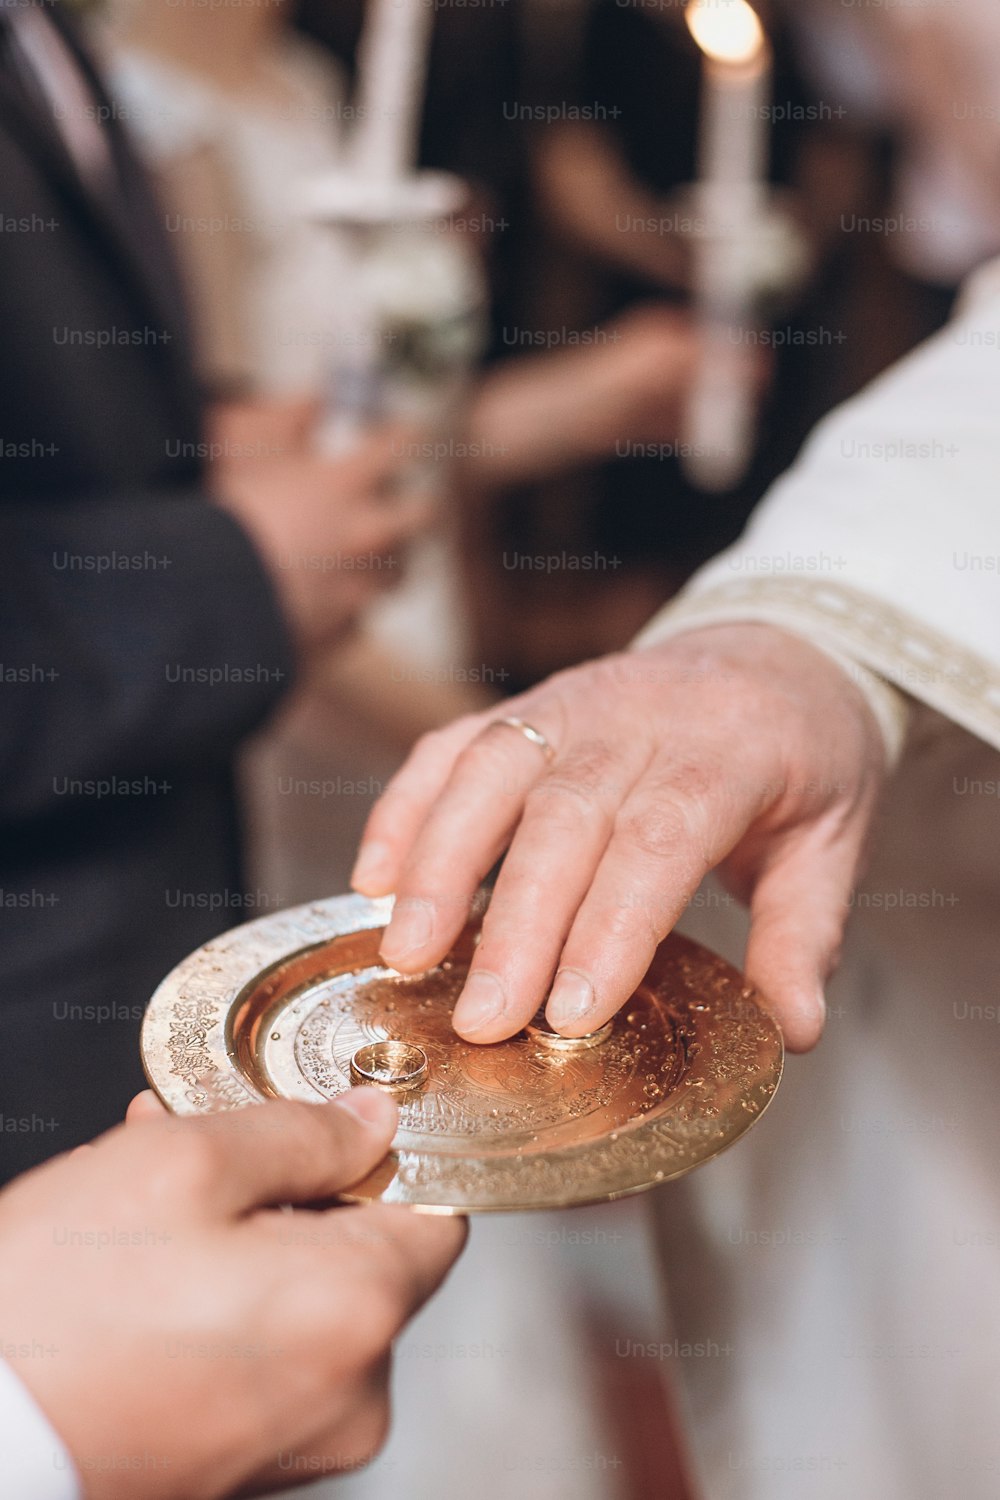 priest golding golden wedding rings on plate in church at wedding matrimony. traditional religious wedding ceremony